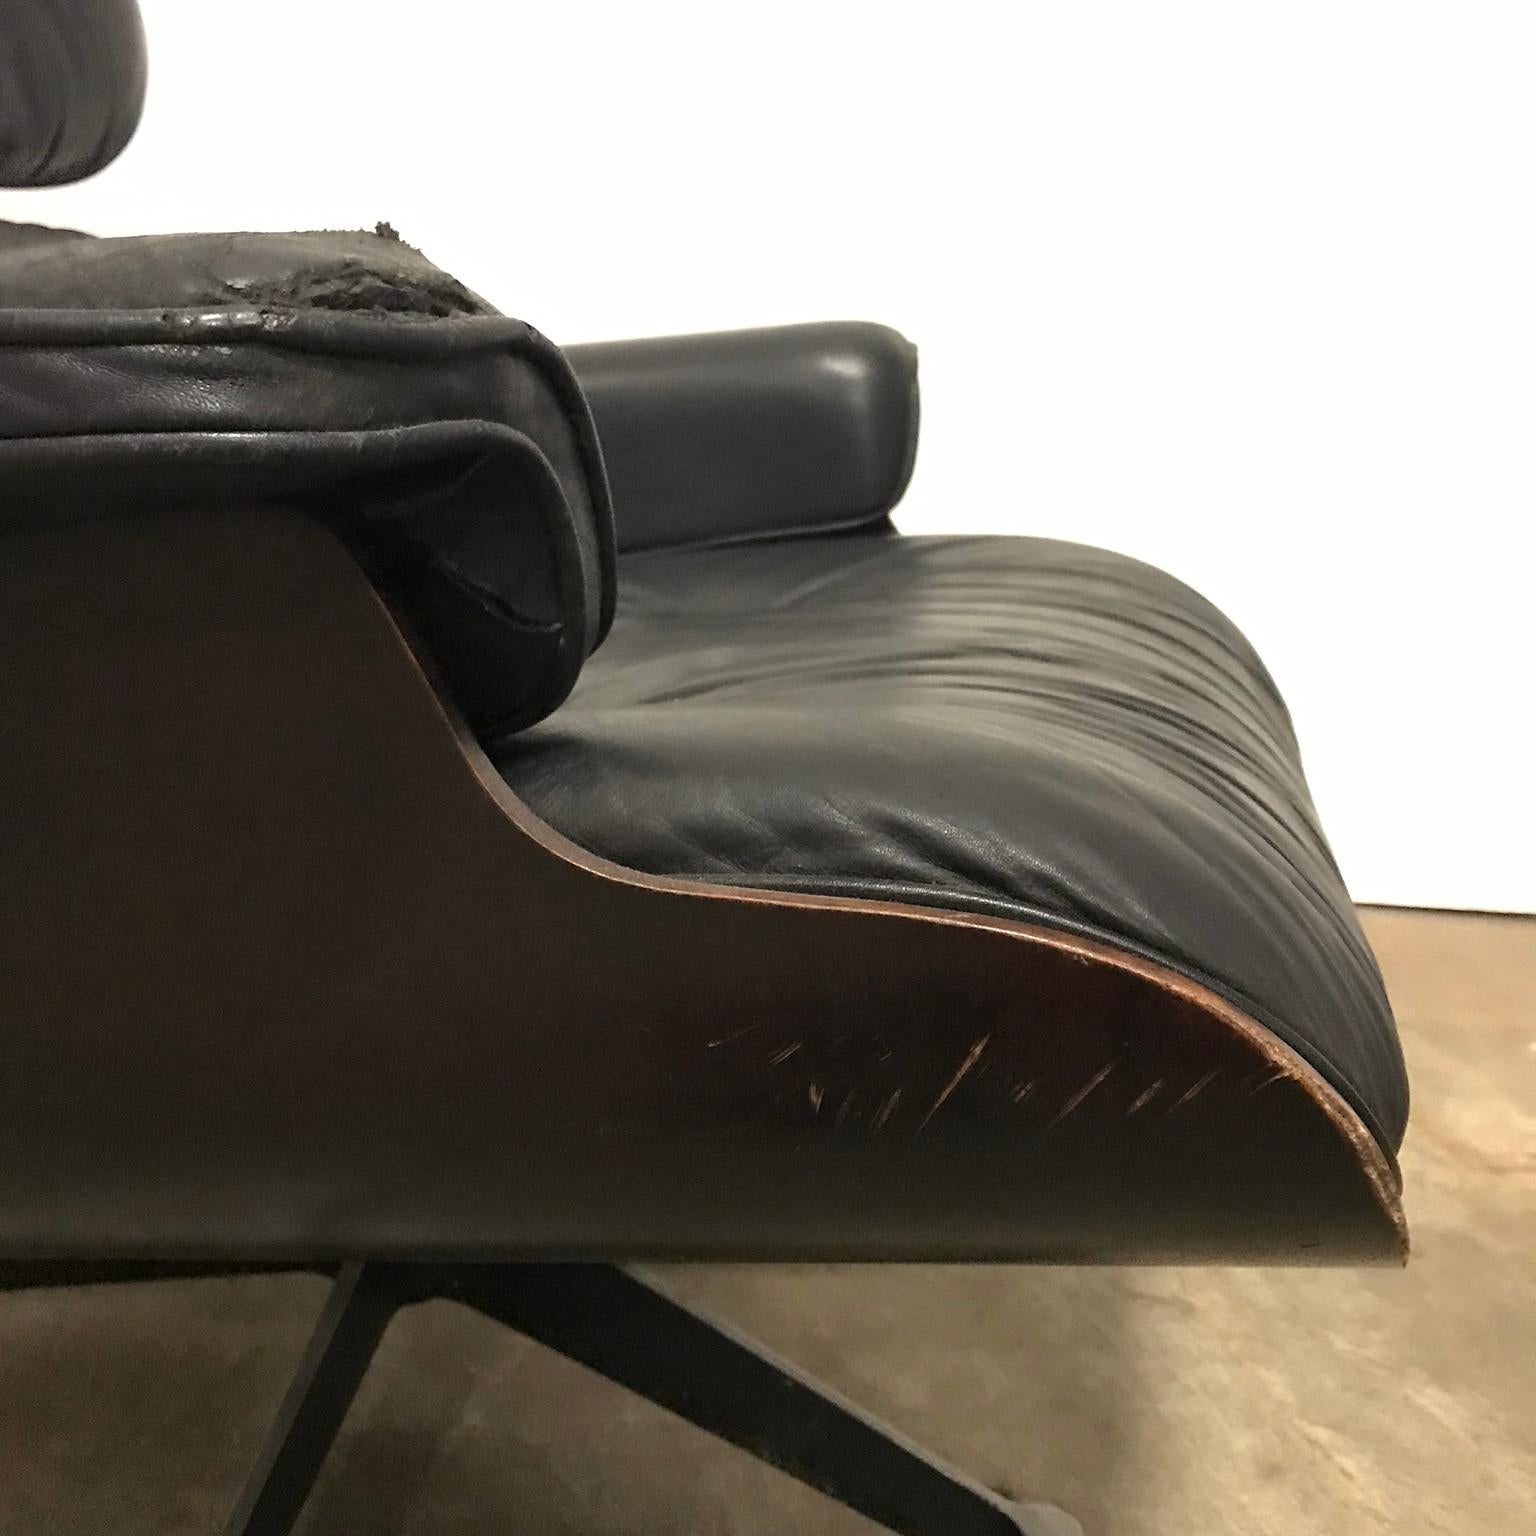 1956, Ray & Charles Eames Lounge Chair, Rare First Edition 1956 in Black Leather For Sale 4